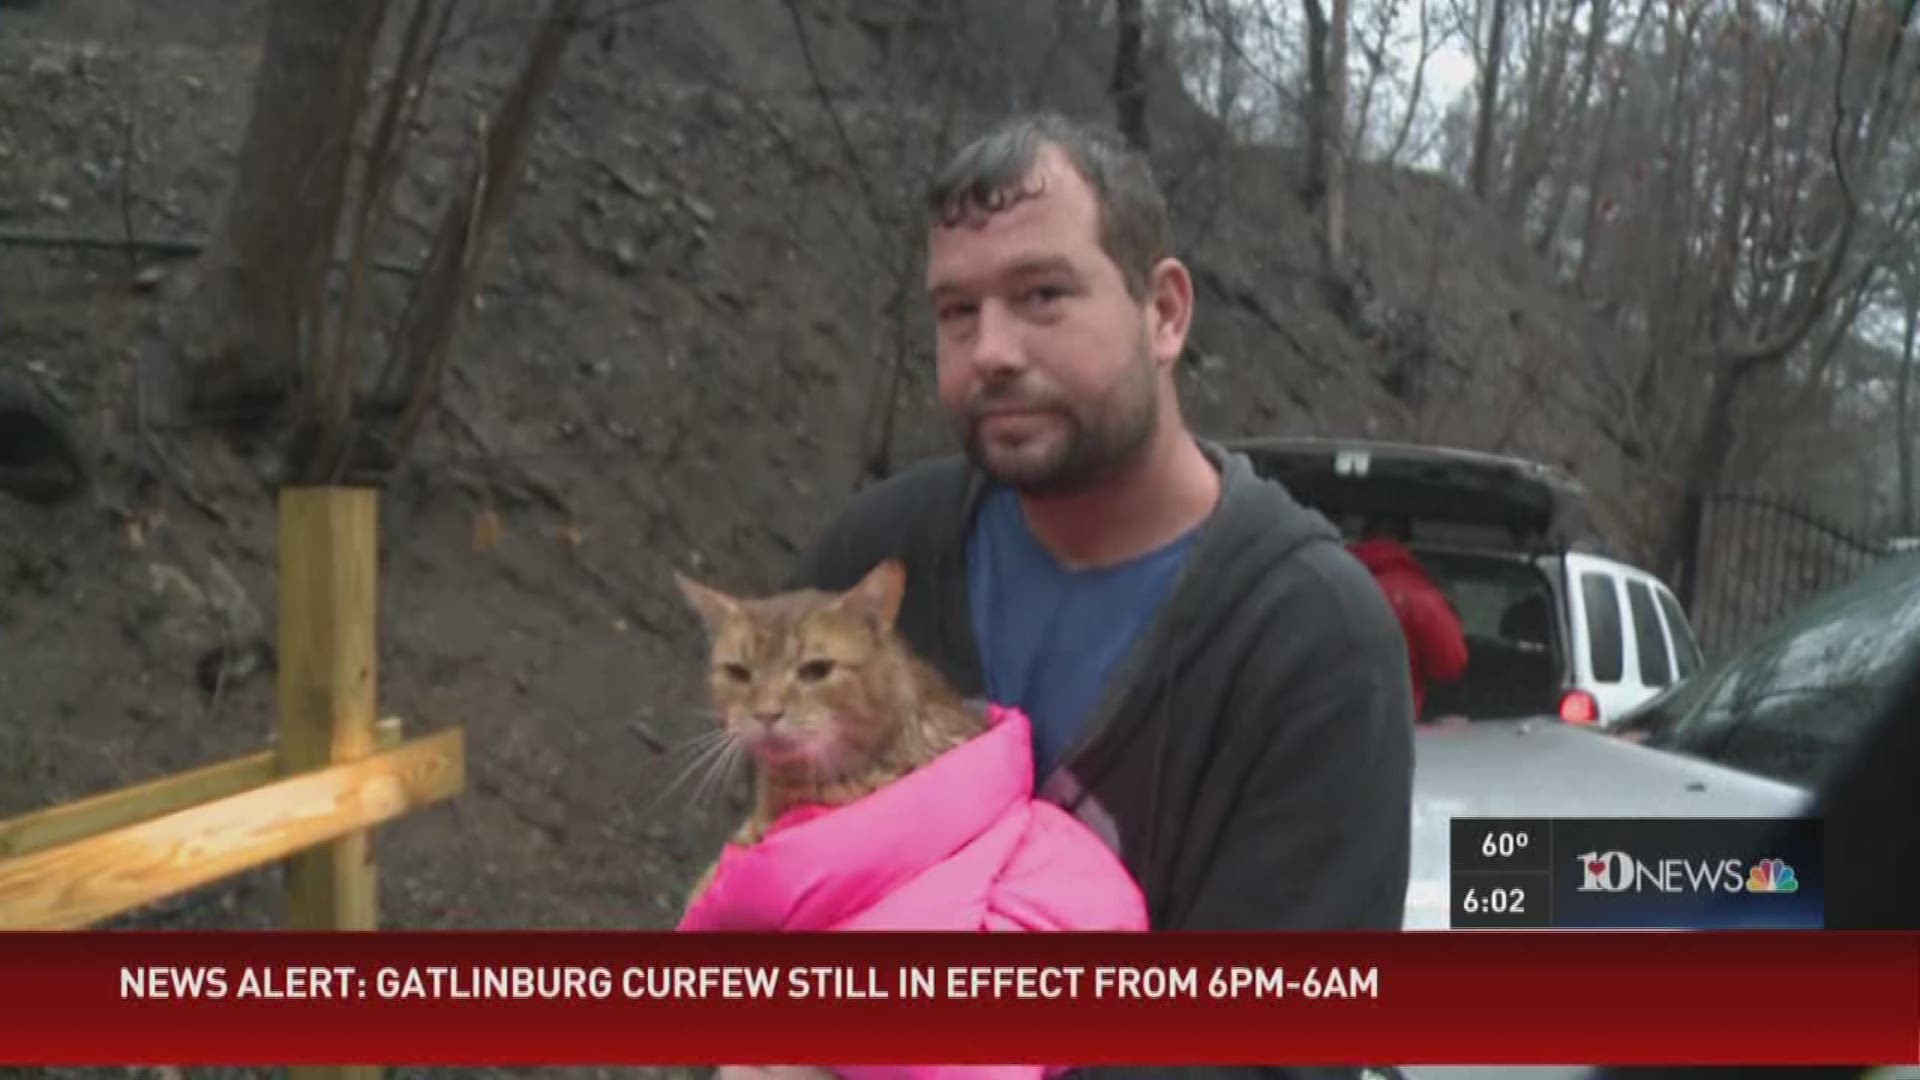 Nov. 30, 2016: A Wears Valley family who lost their home in the fires are glad to have found their cat who went missing during their evacuation.